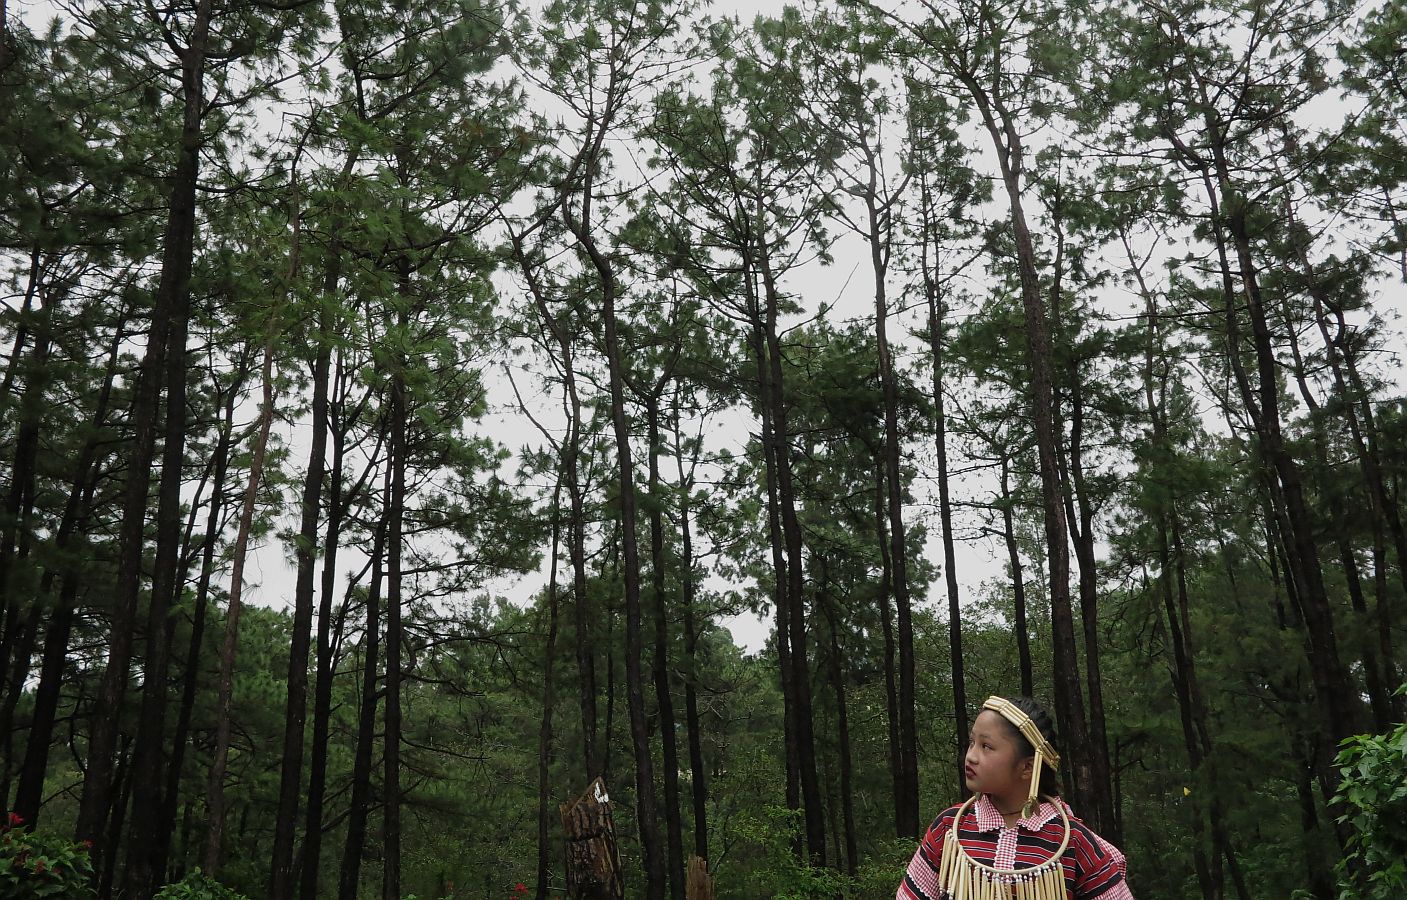 Save our pine trees, Baguio kids ask Duterte